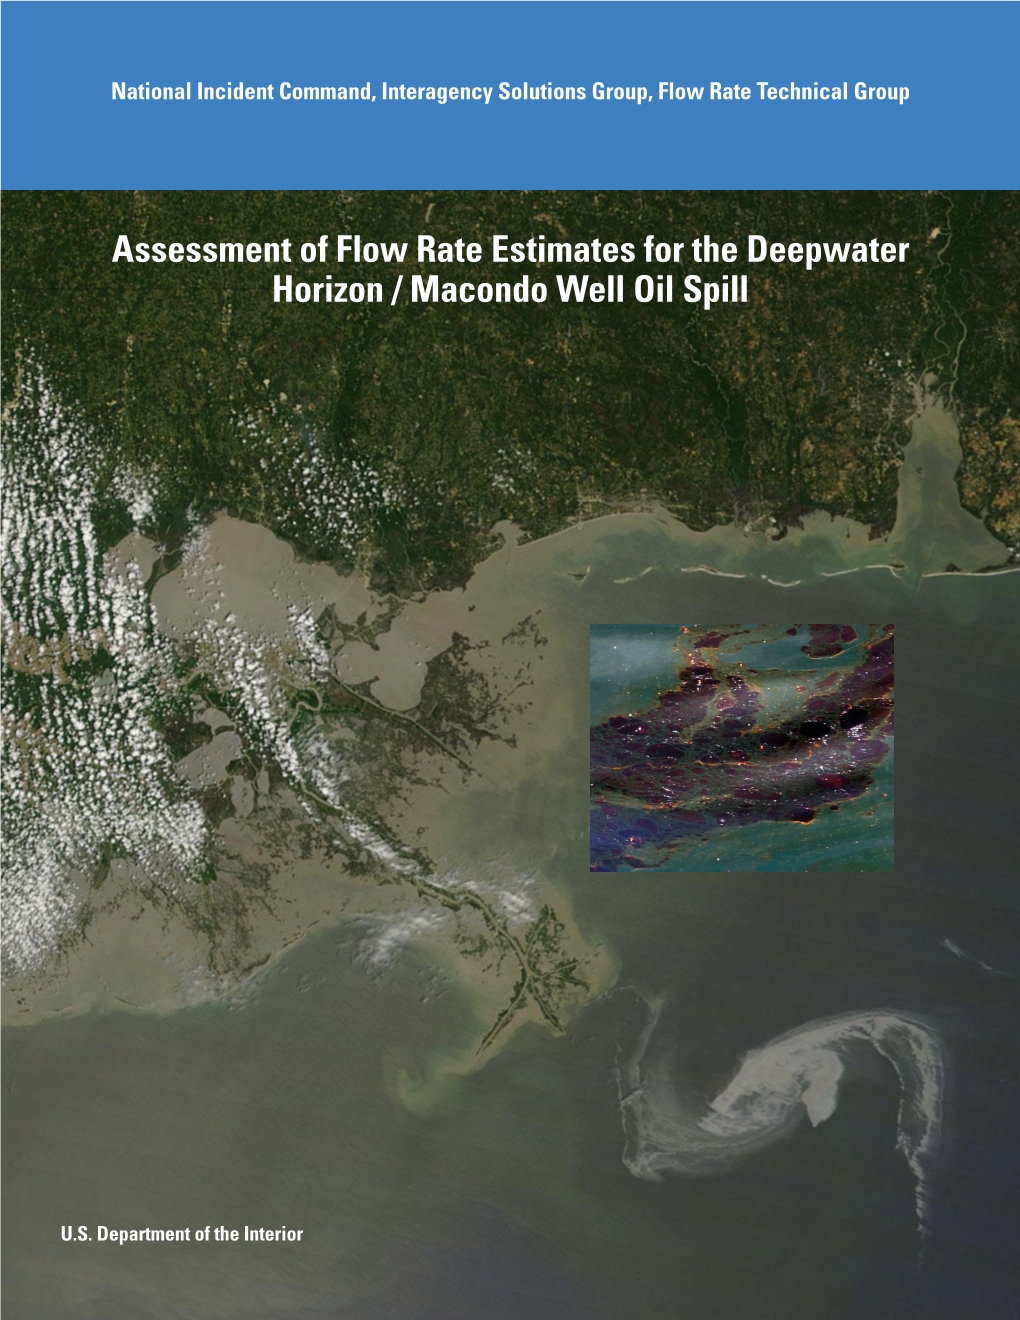 Assessment of Flow Rate Estimates for the Deepwater Horizon / Macondo Well Oil Spill